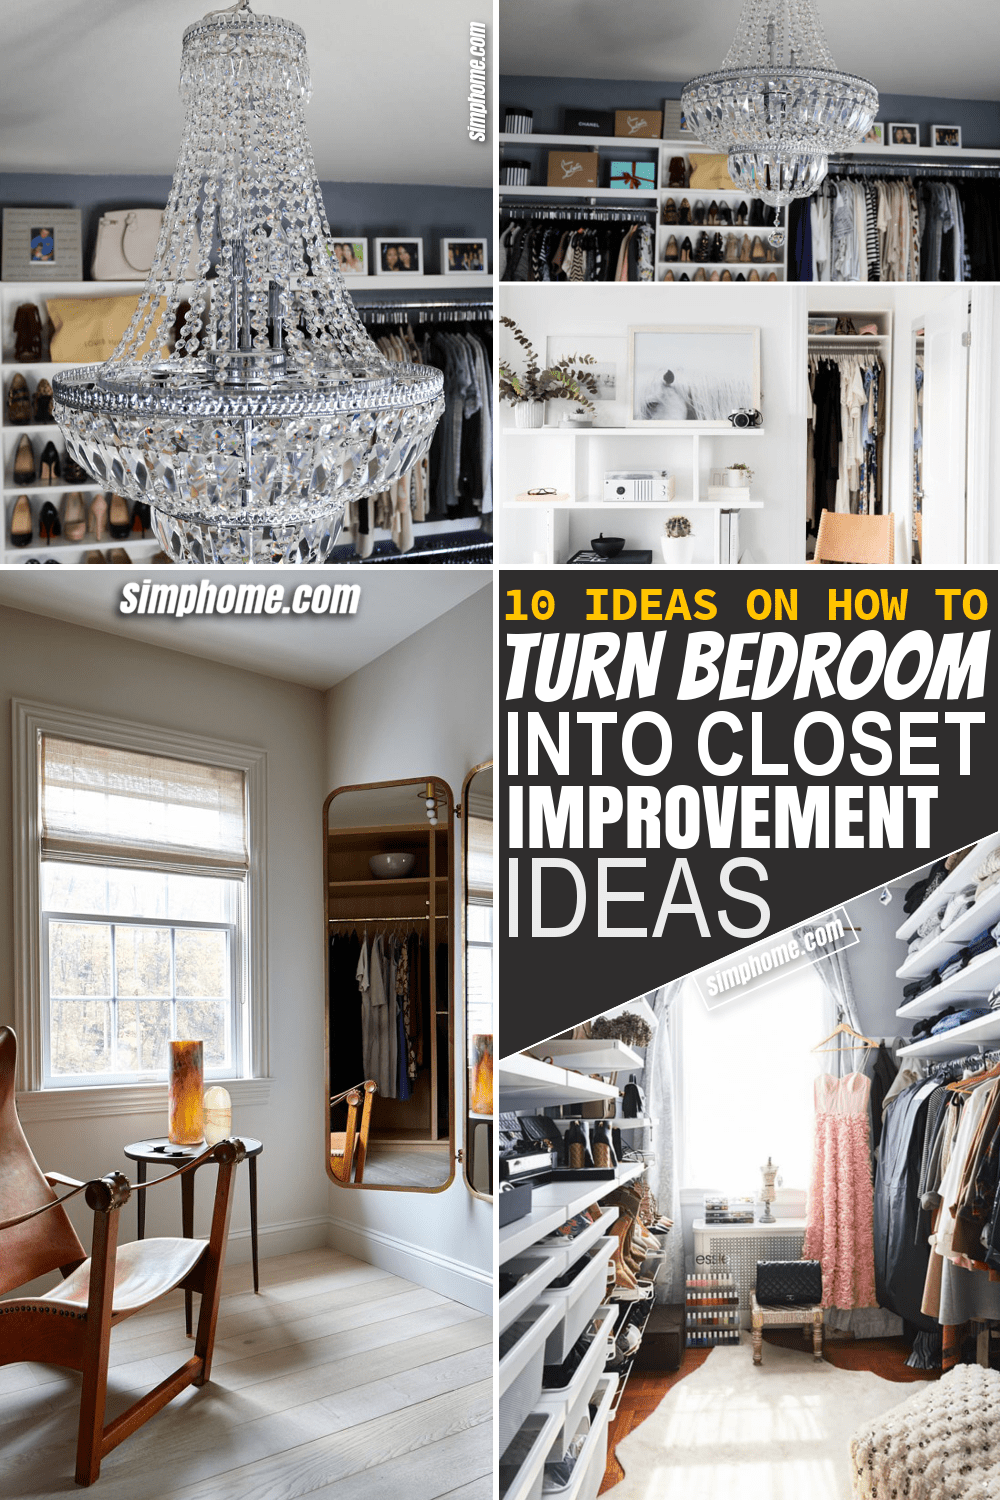 Simphome.com 10 ideas on how to turn a bedroom into a closet Featured Image